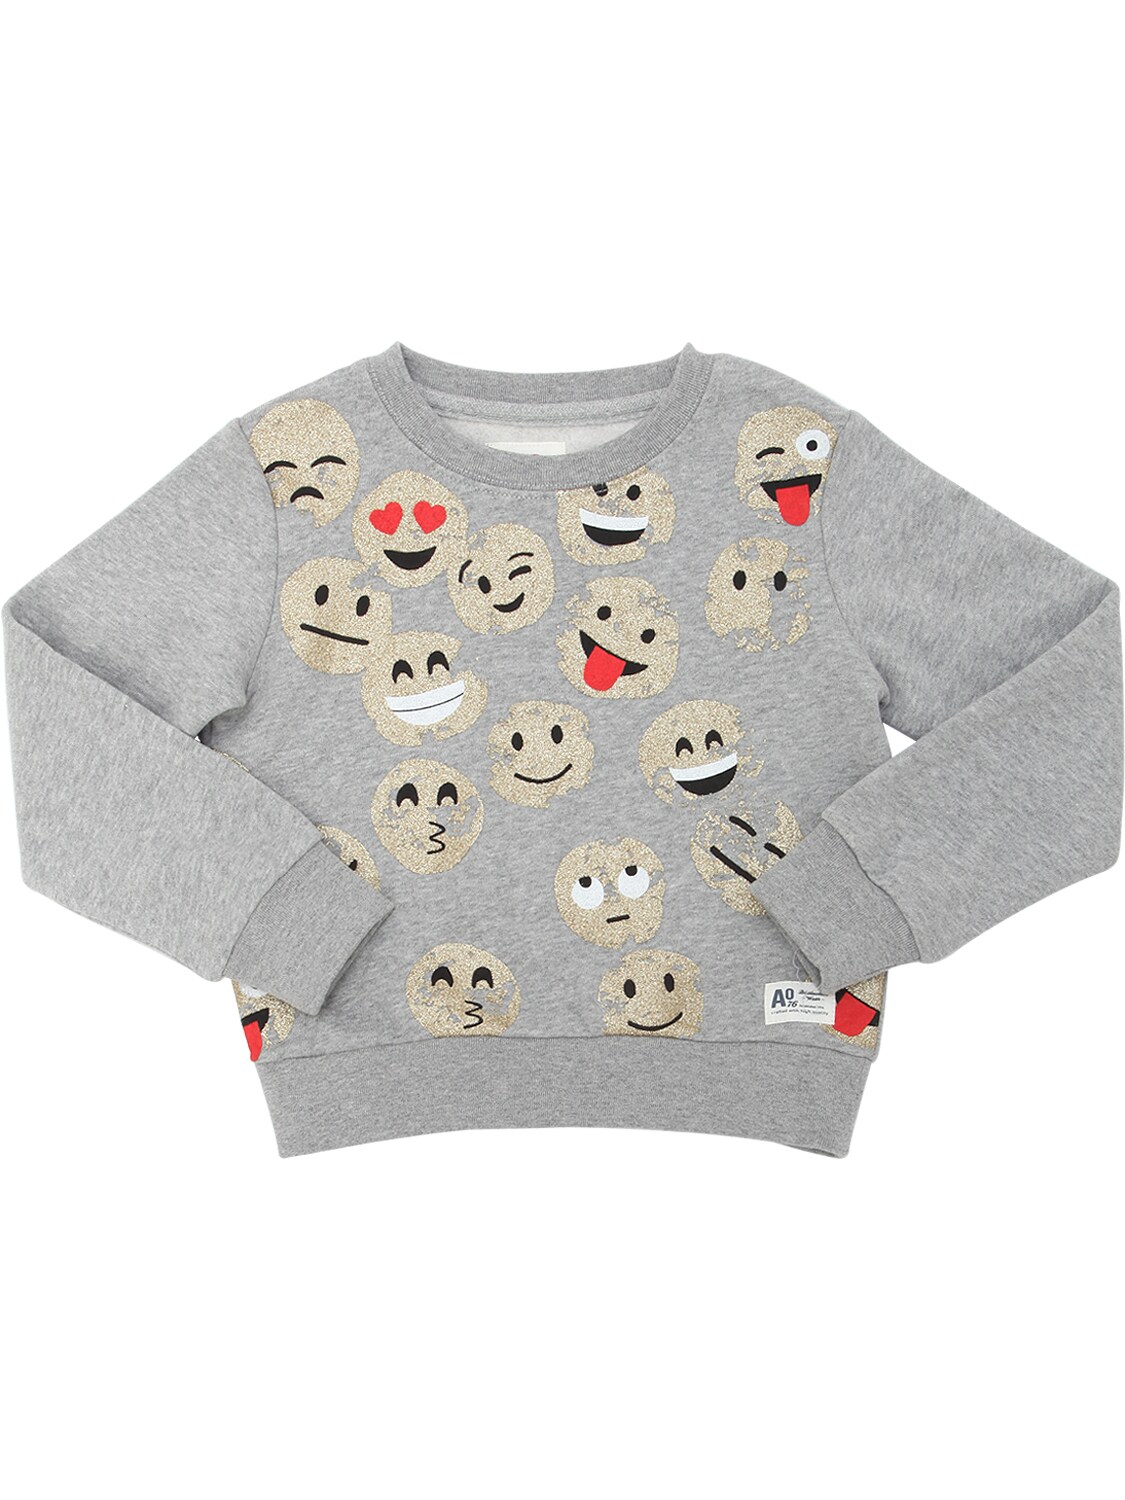 American Outfitters Kids' Glittered Smiles Cotton Sweatshirt In Grey